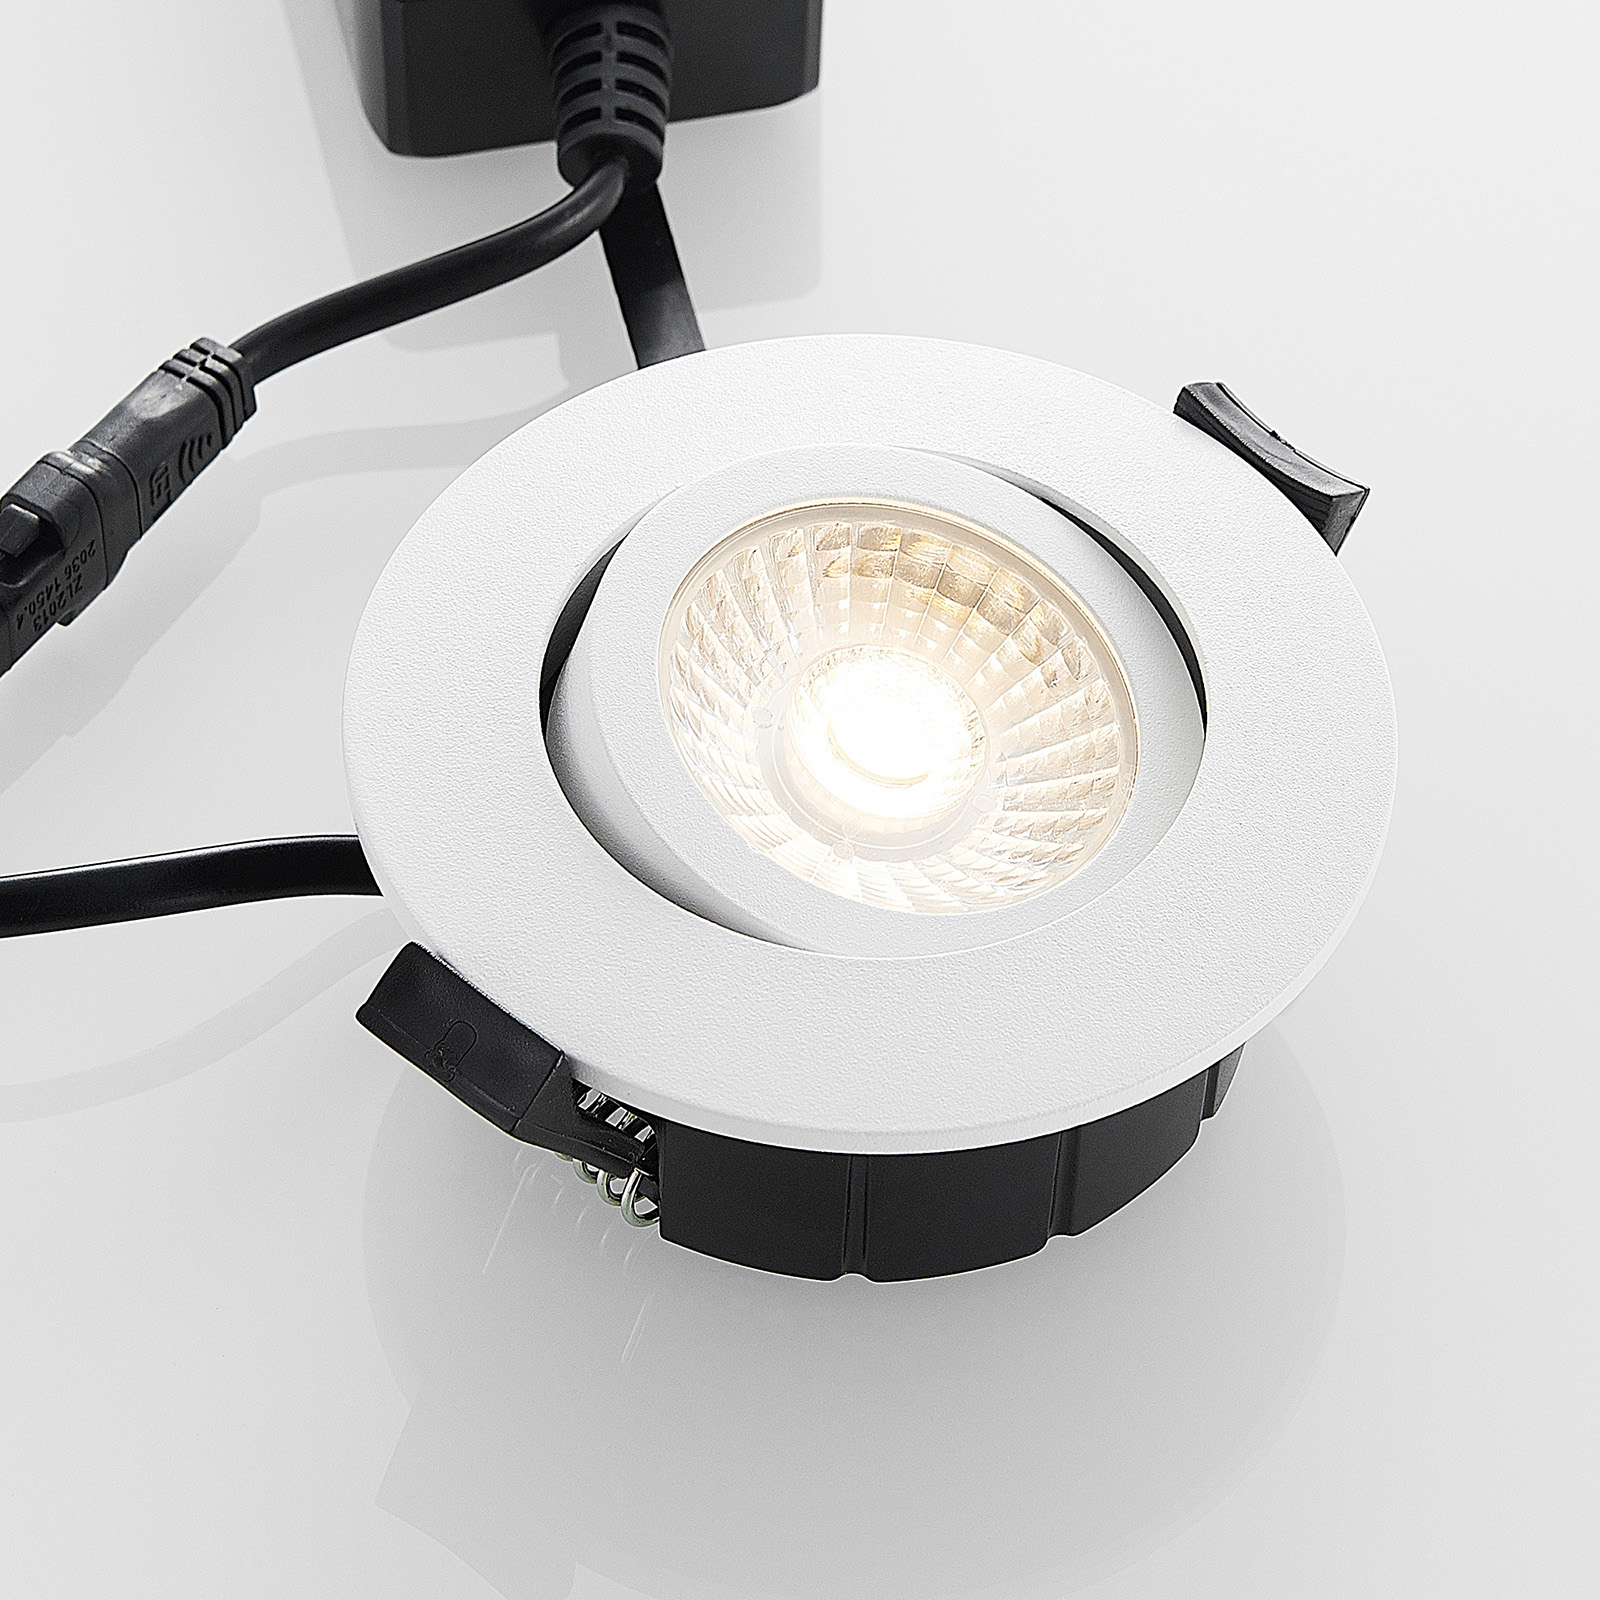 Arcchio Ricals downlight LED, atenuable